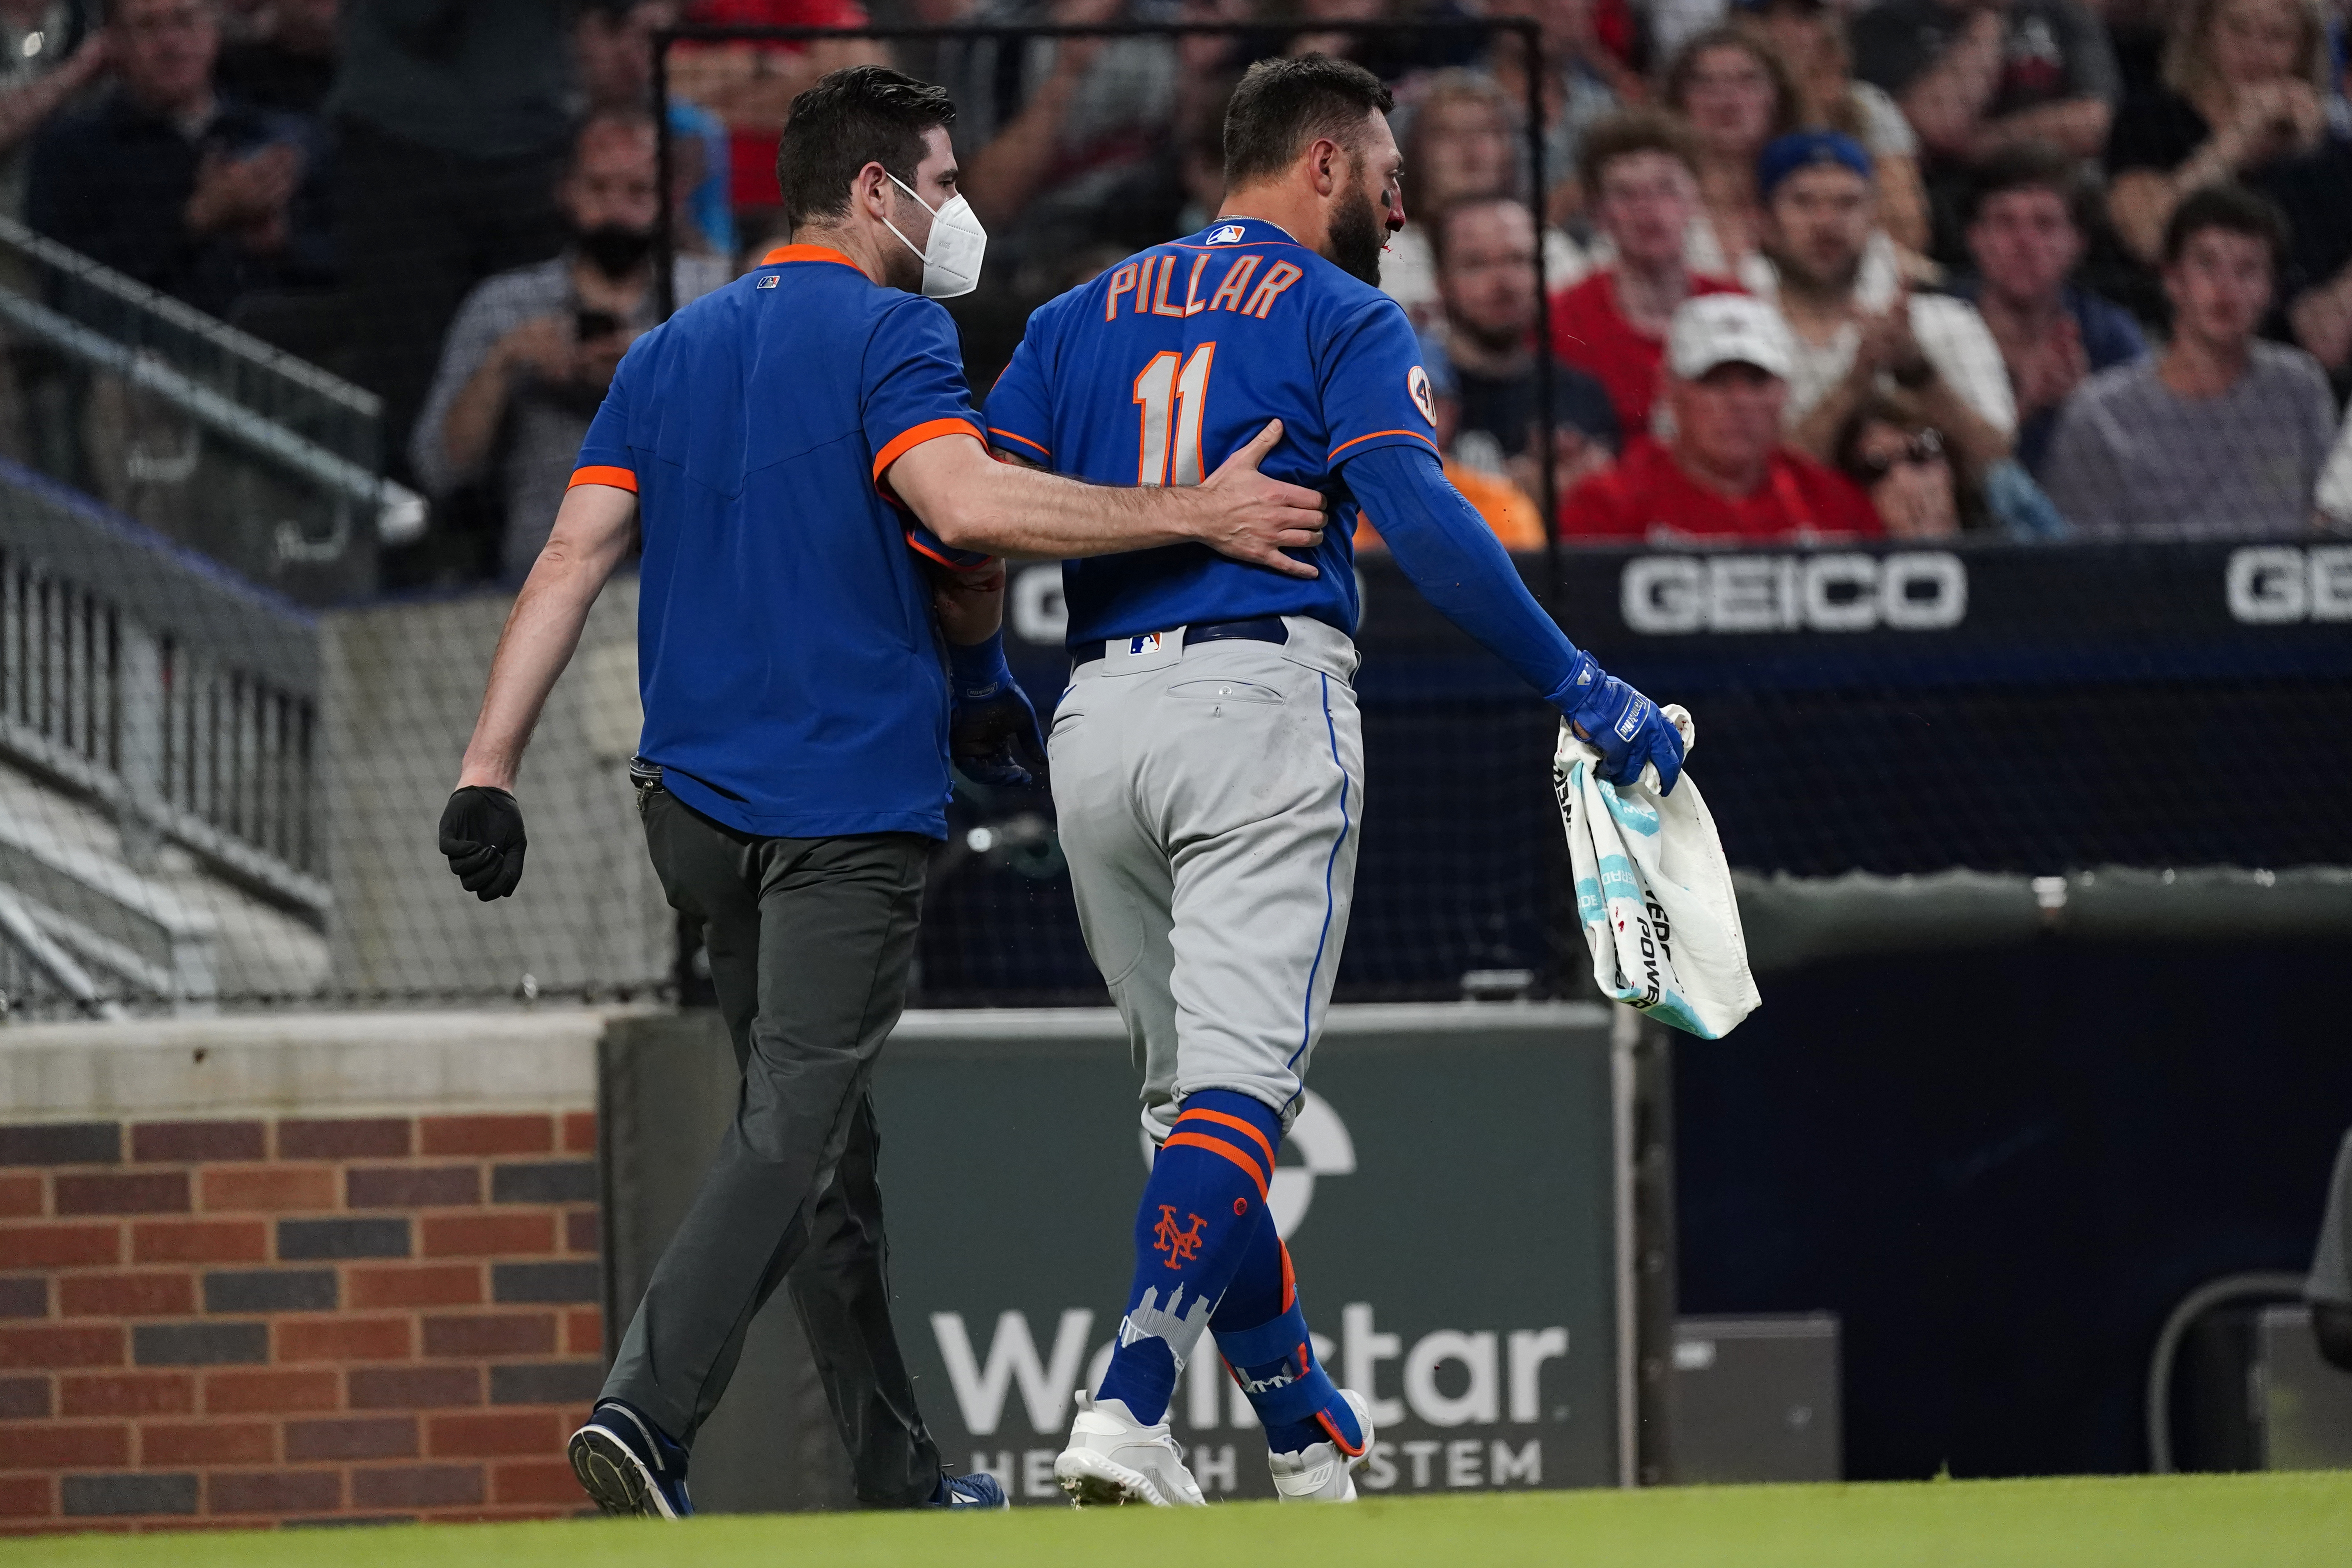 Mets' Kevin Pillar suffers multiple nose fractures from 95 mph